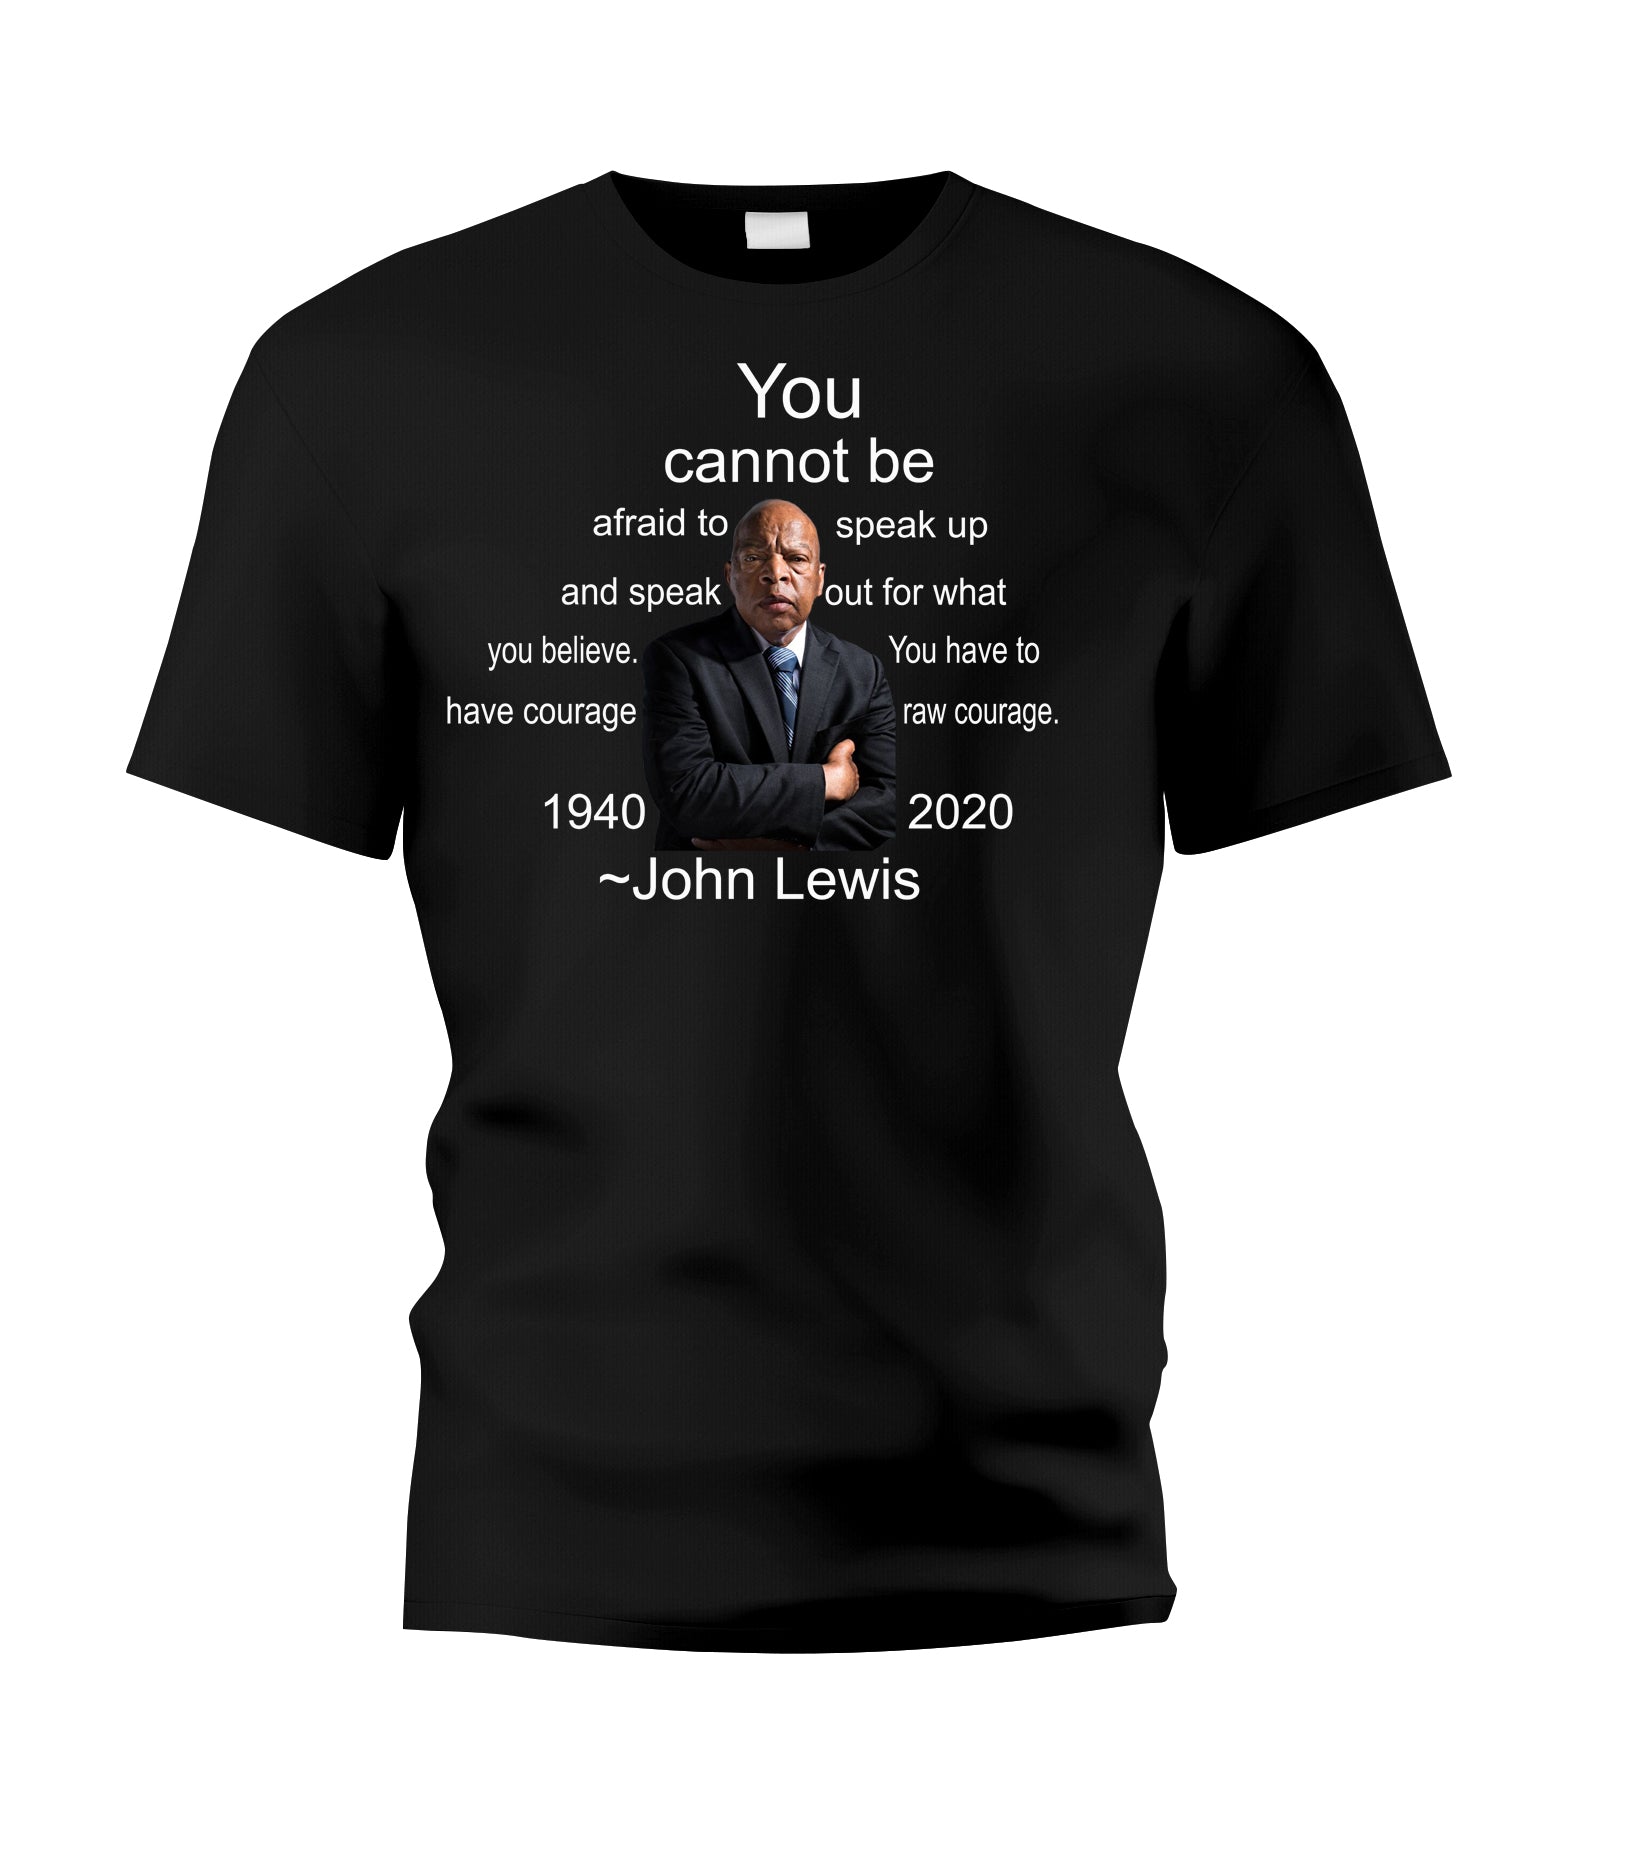 John Lewis "You can't be afraid to speak up" T-Shirt